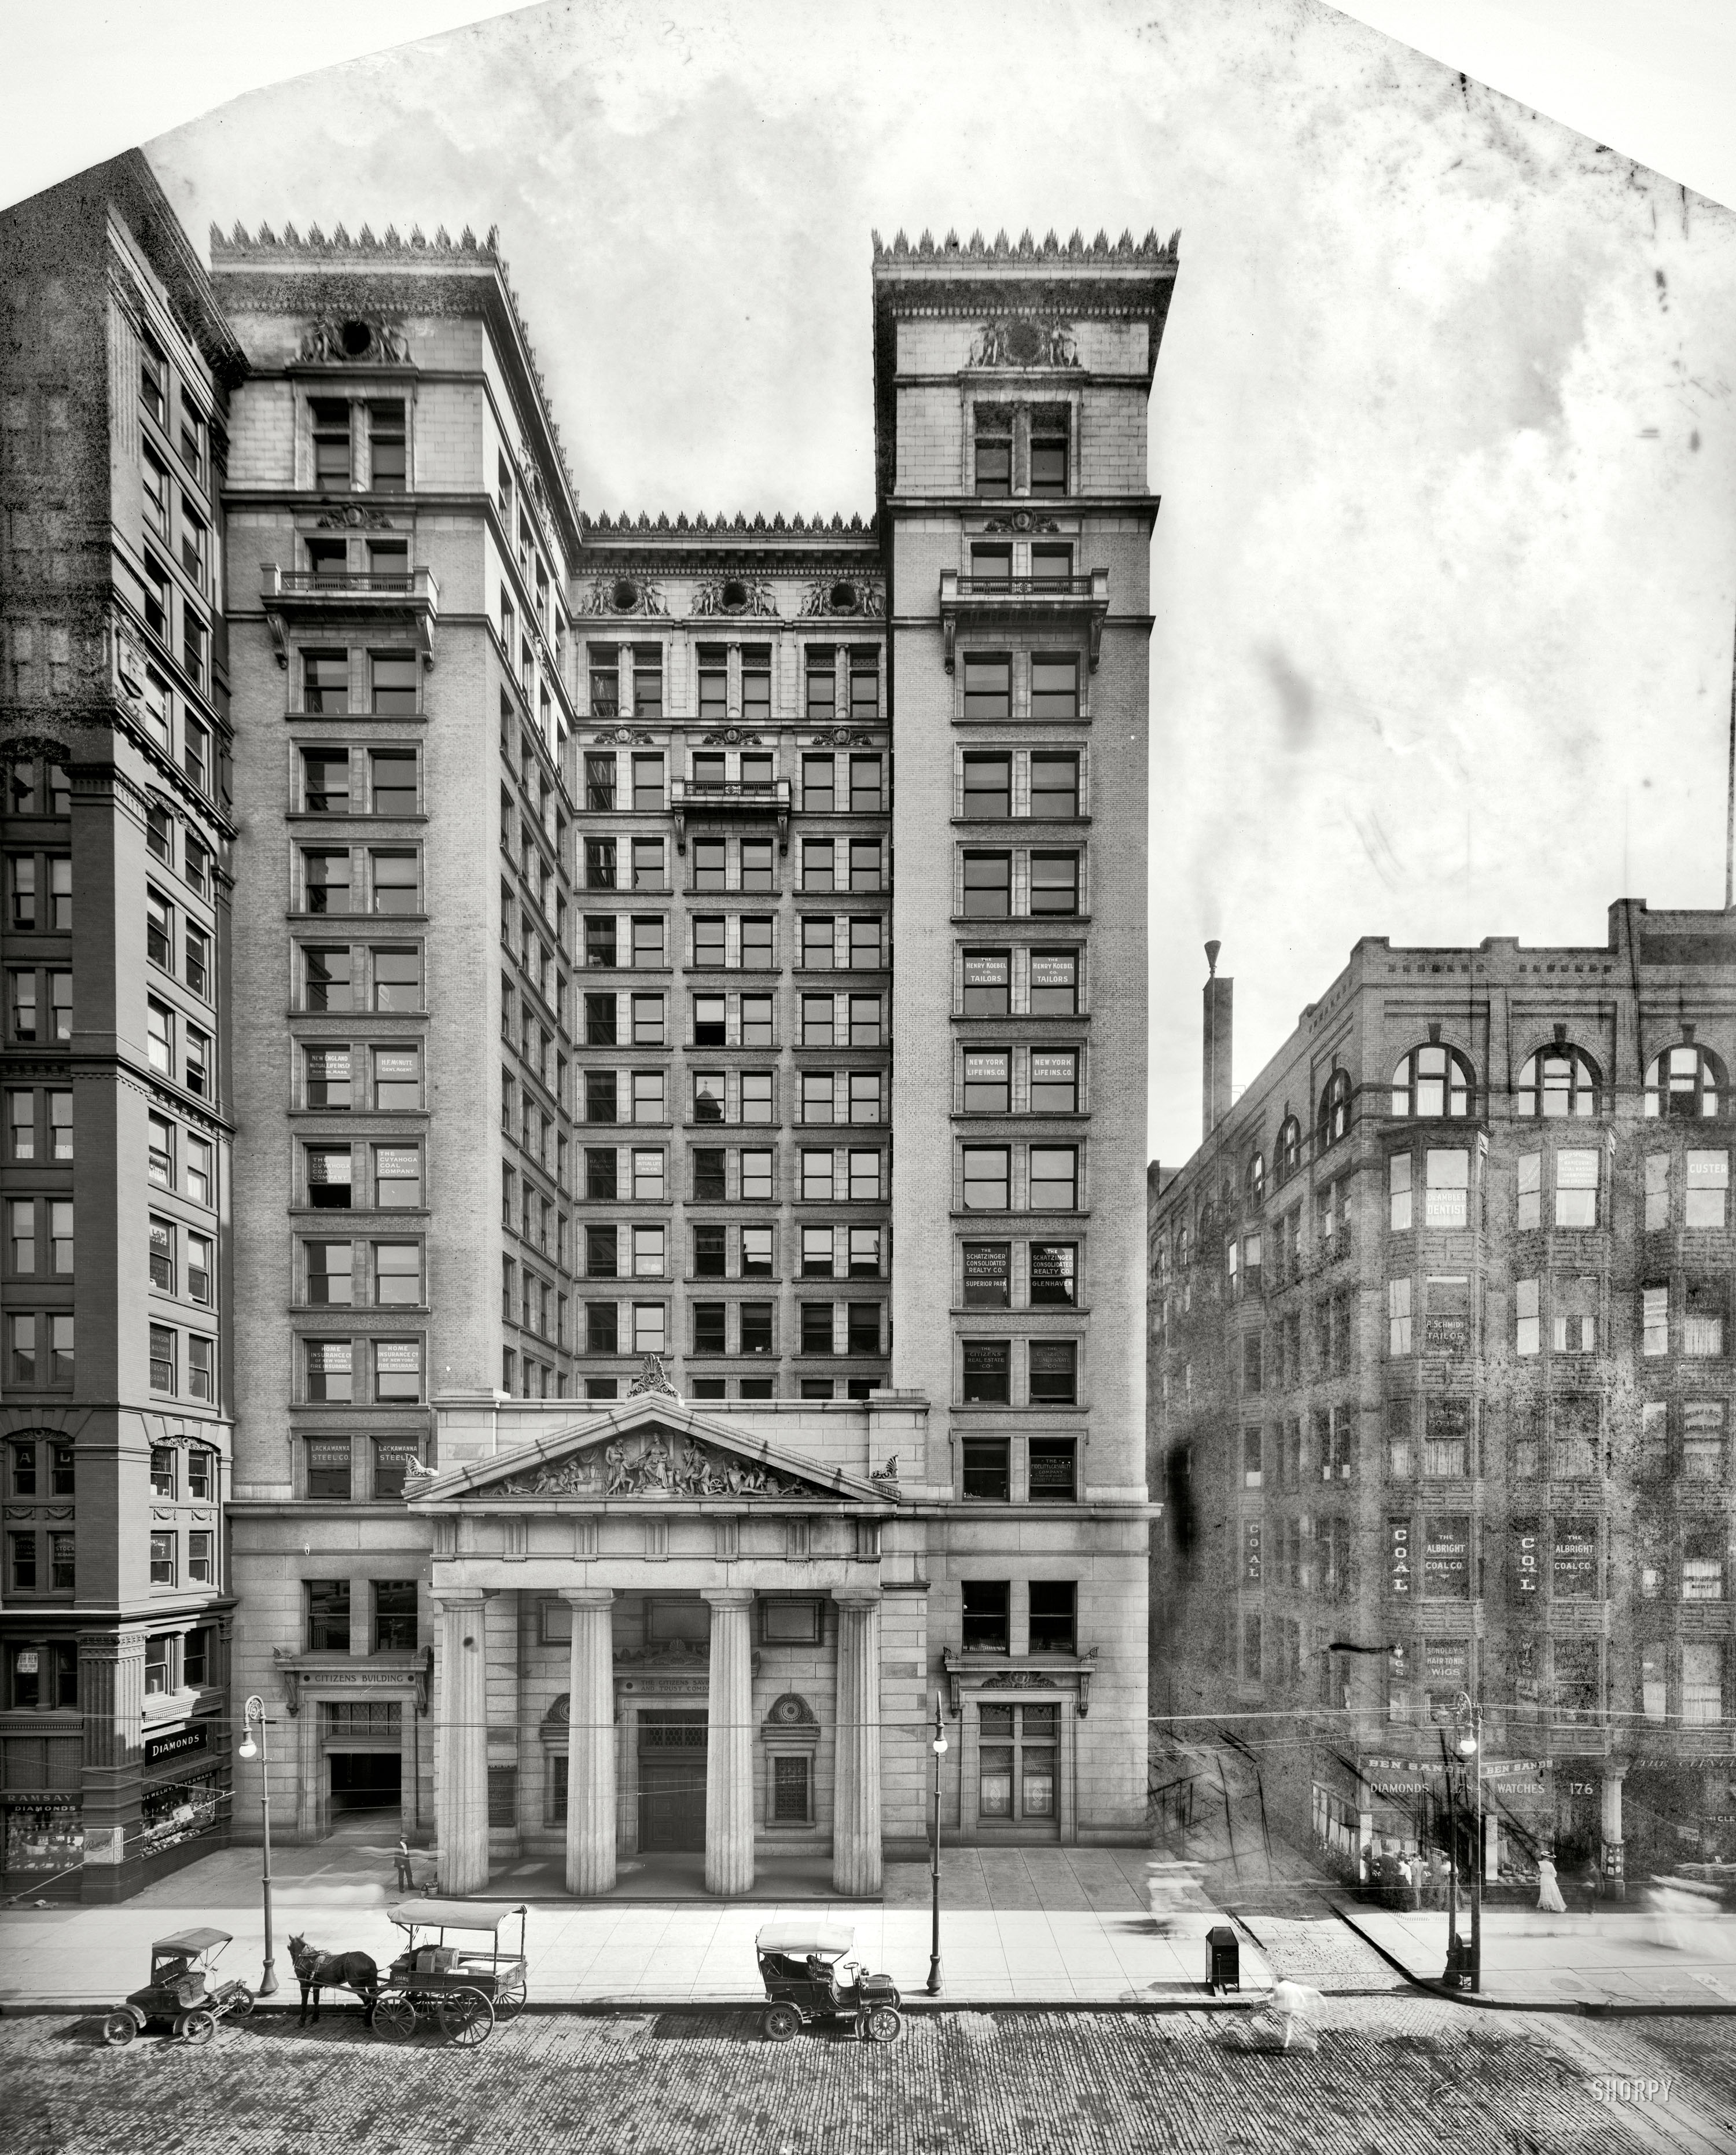 Cleveland, Ohio, circa 1905. "Citizens Savings and Trust Company building." Compared to the bulk of Detroit Publishing's glass negatives, this 8x10 plate has been heavily reworked, with the top corners masked out and buildings to either side subordinated under a layer of smudges and stipples. View full size.